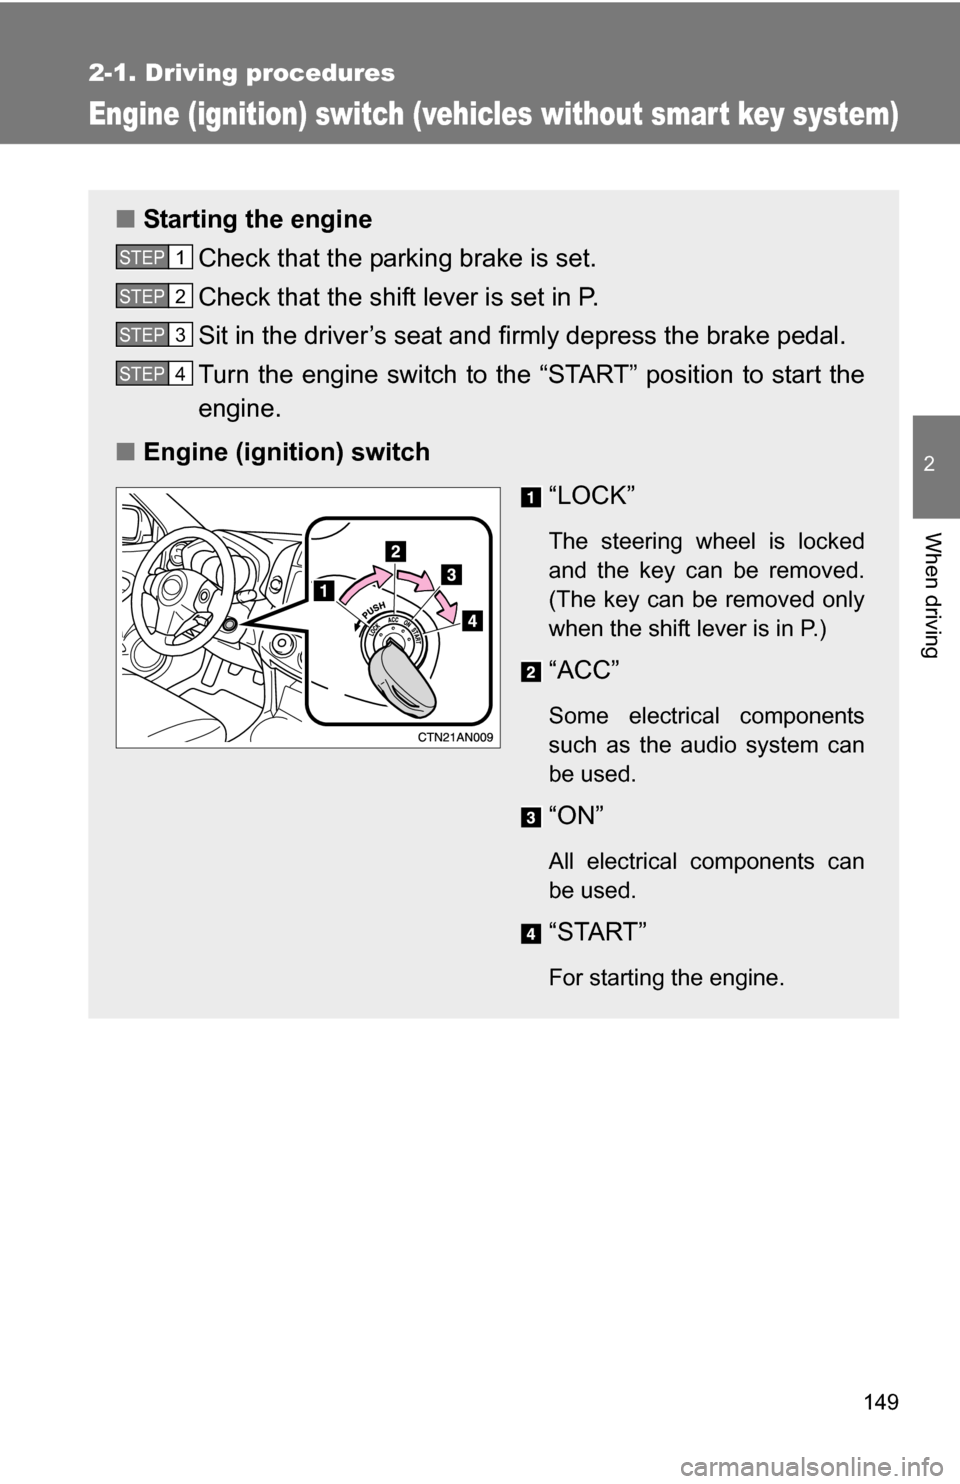 TOYOTA RAV4 2012 XA30 / 3.G Owners Manual 149
2-1. Driving procedures
2
When driving
Engine (ignition) switch (vehicles without smart key system)
■Starting the engine
Check that the parking brake is set.
Check that the shift lever is set in